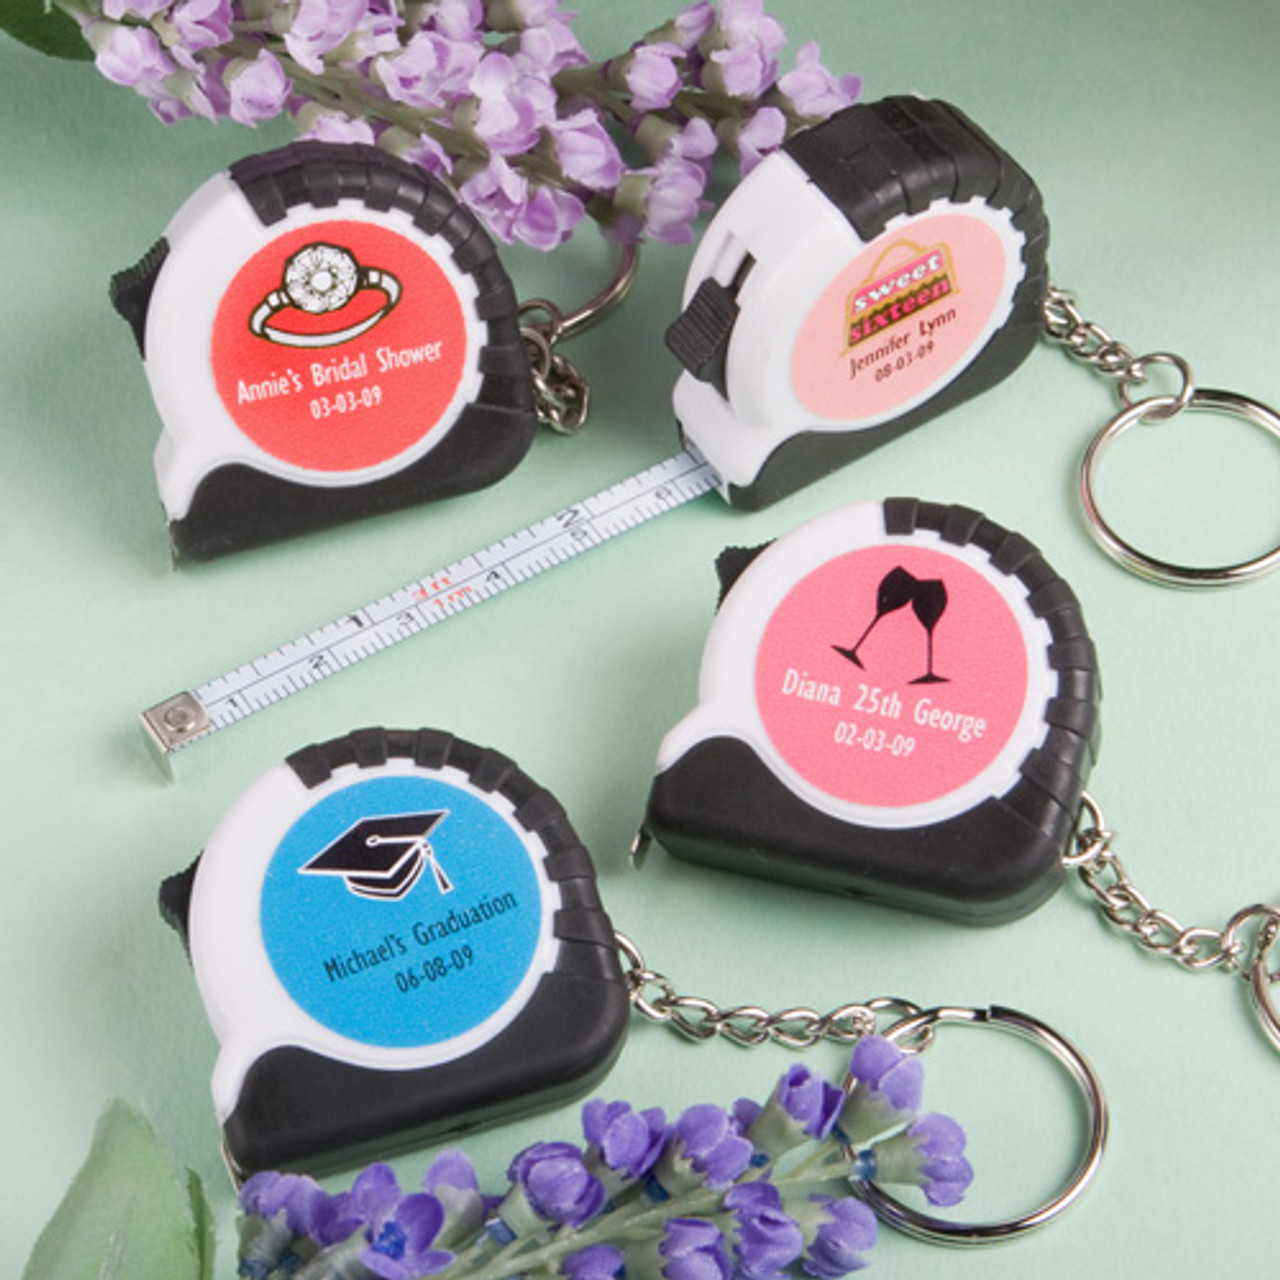 Personalized Key chain/Measuring Tapes Favors